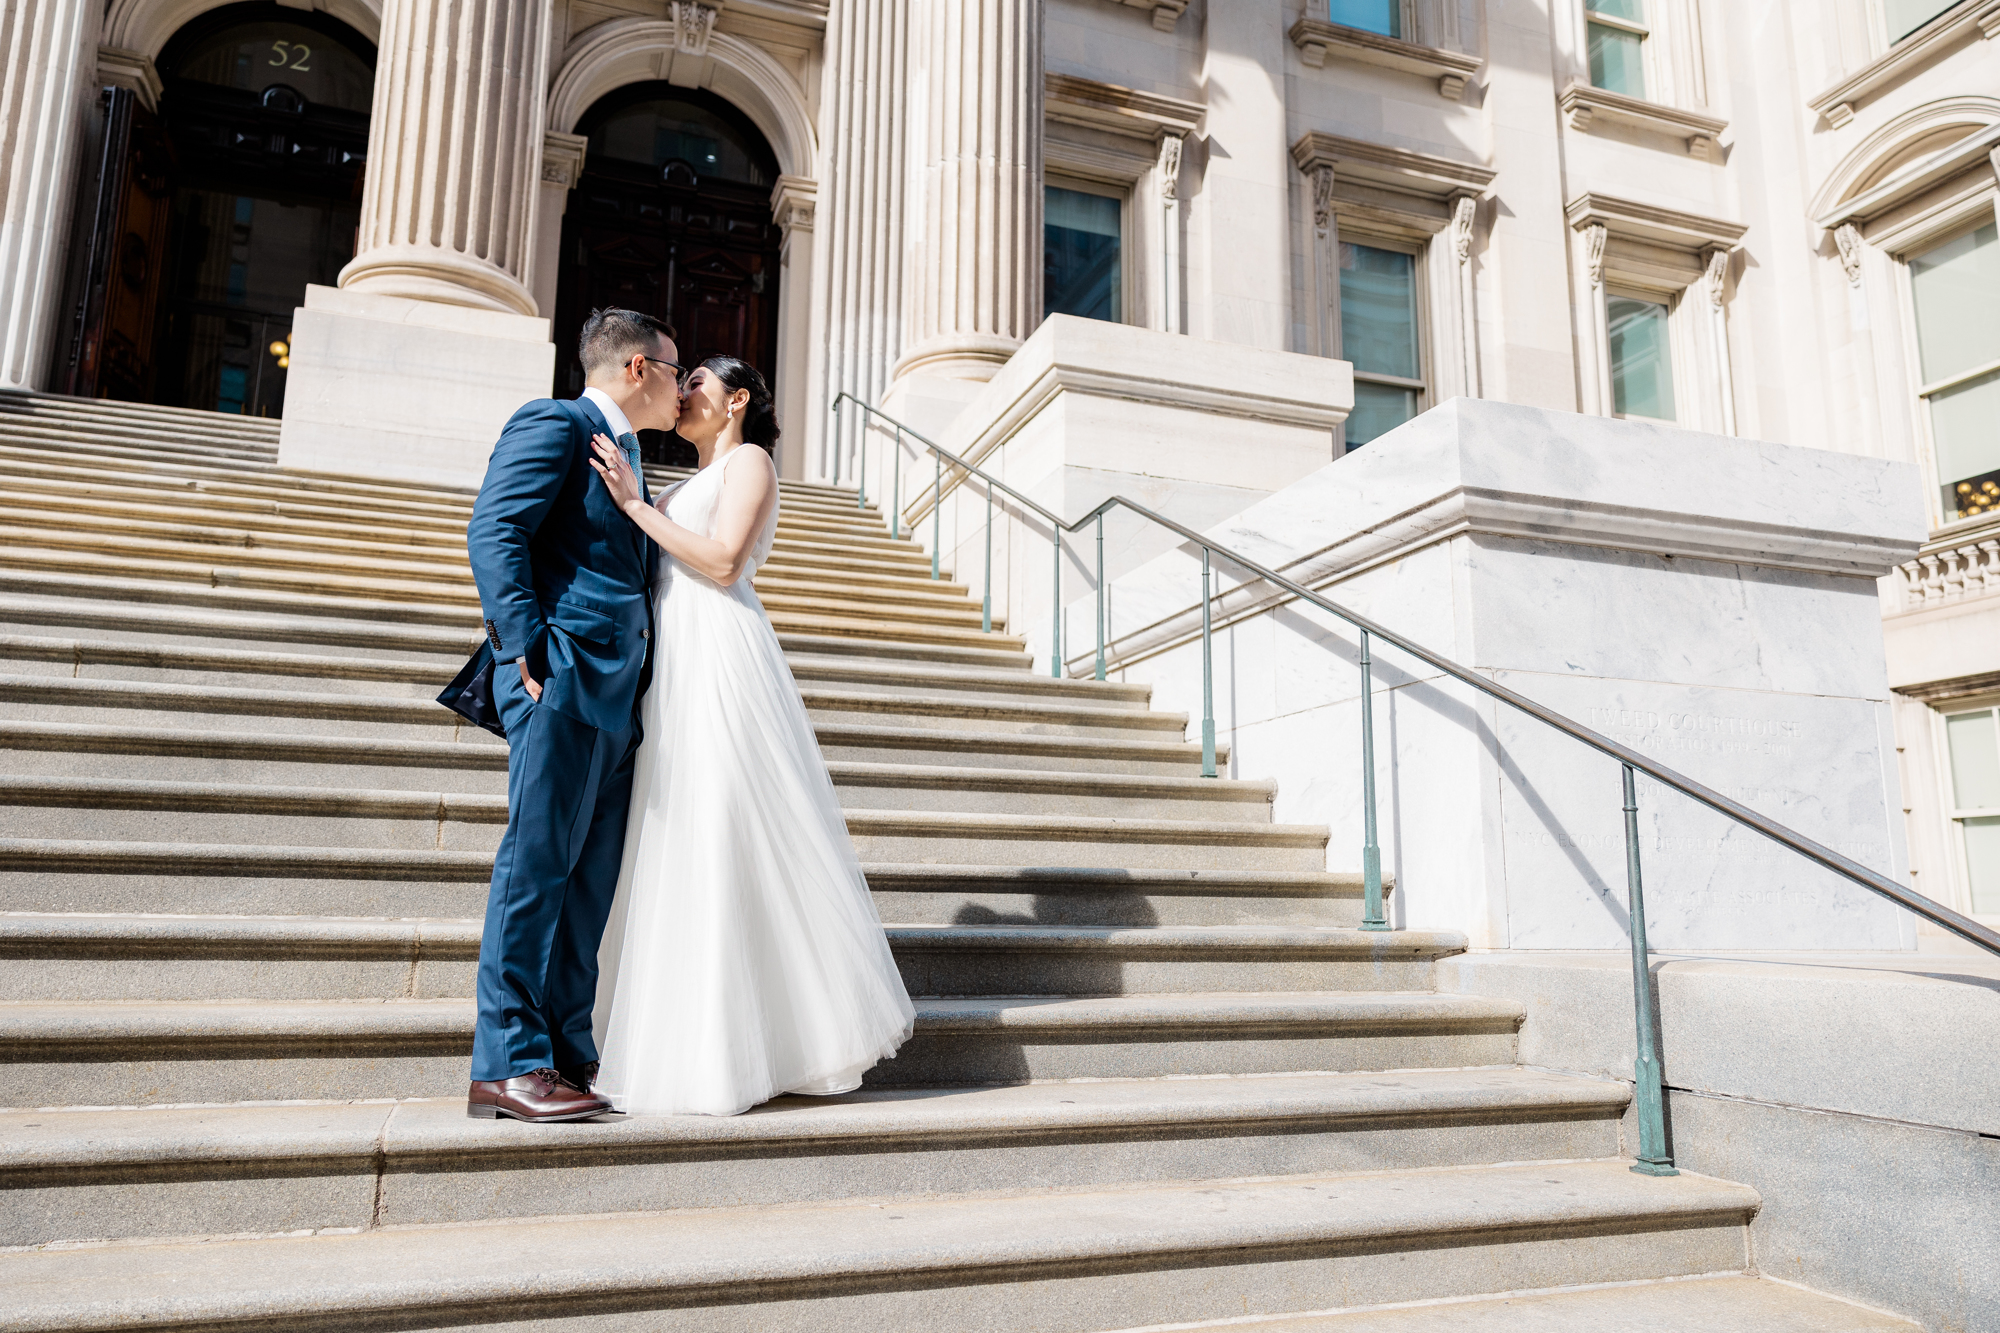 Fun Elopement Photos in DUMBO and Central Park New York